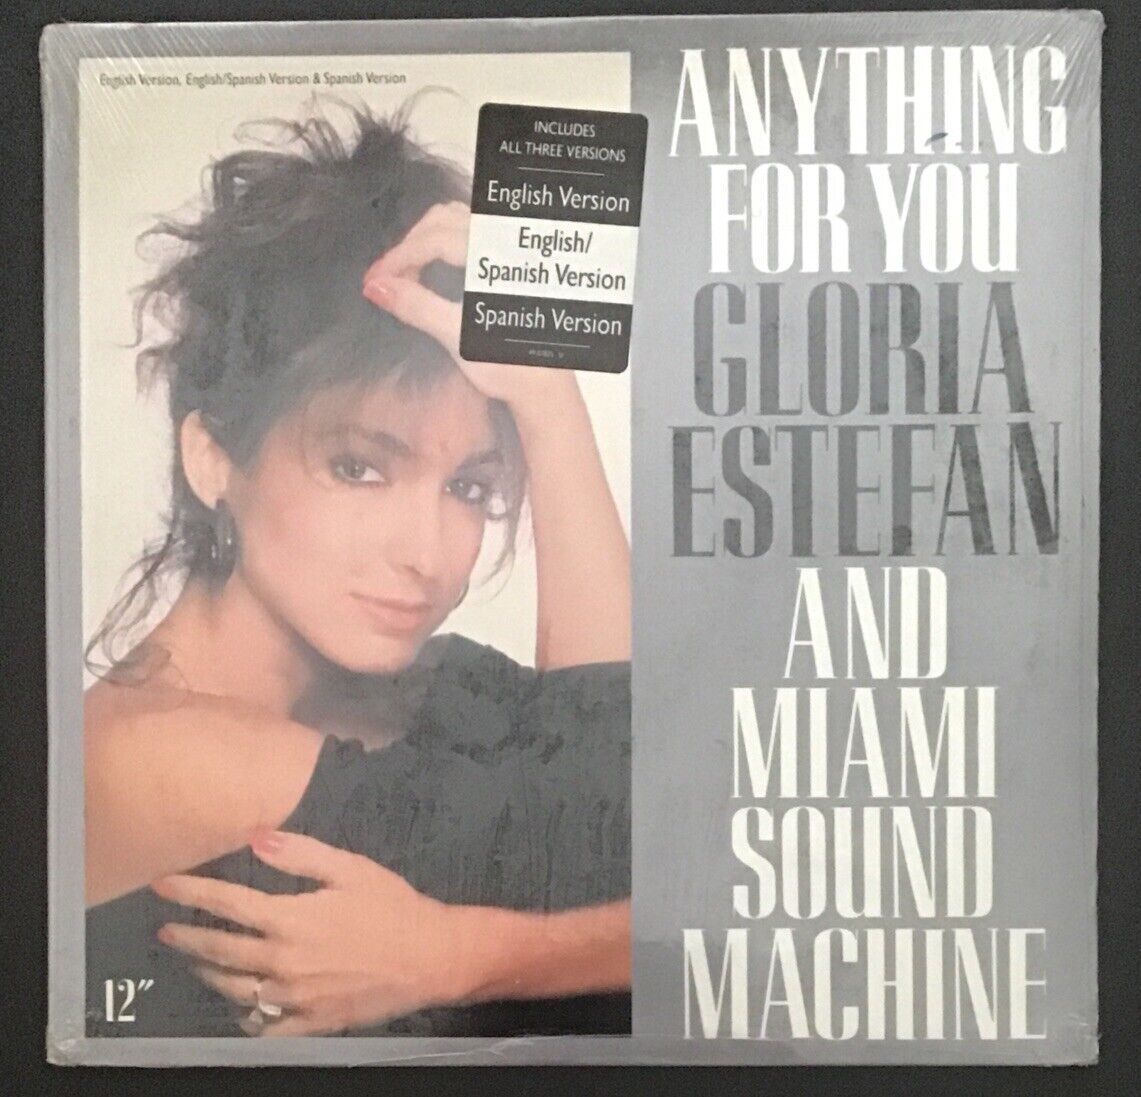 GLORIA ESTEFAN AND MIAMI SOUND MACHINE - Anything For You 12” -  Epic — Sealed